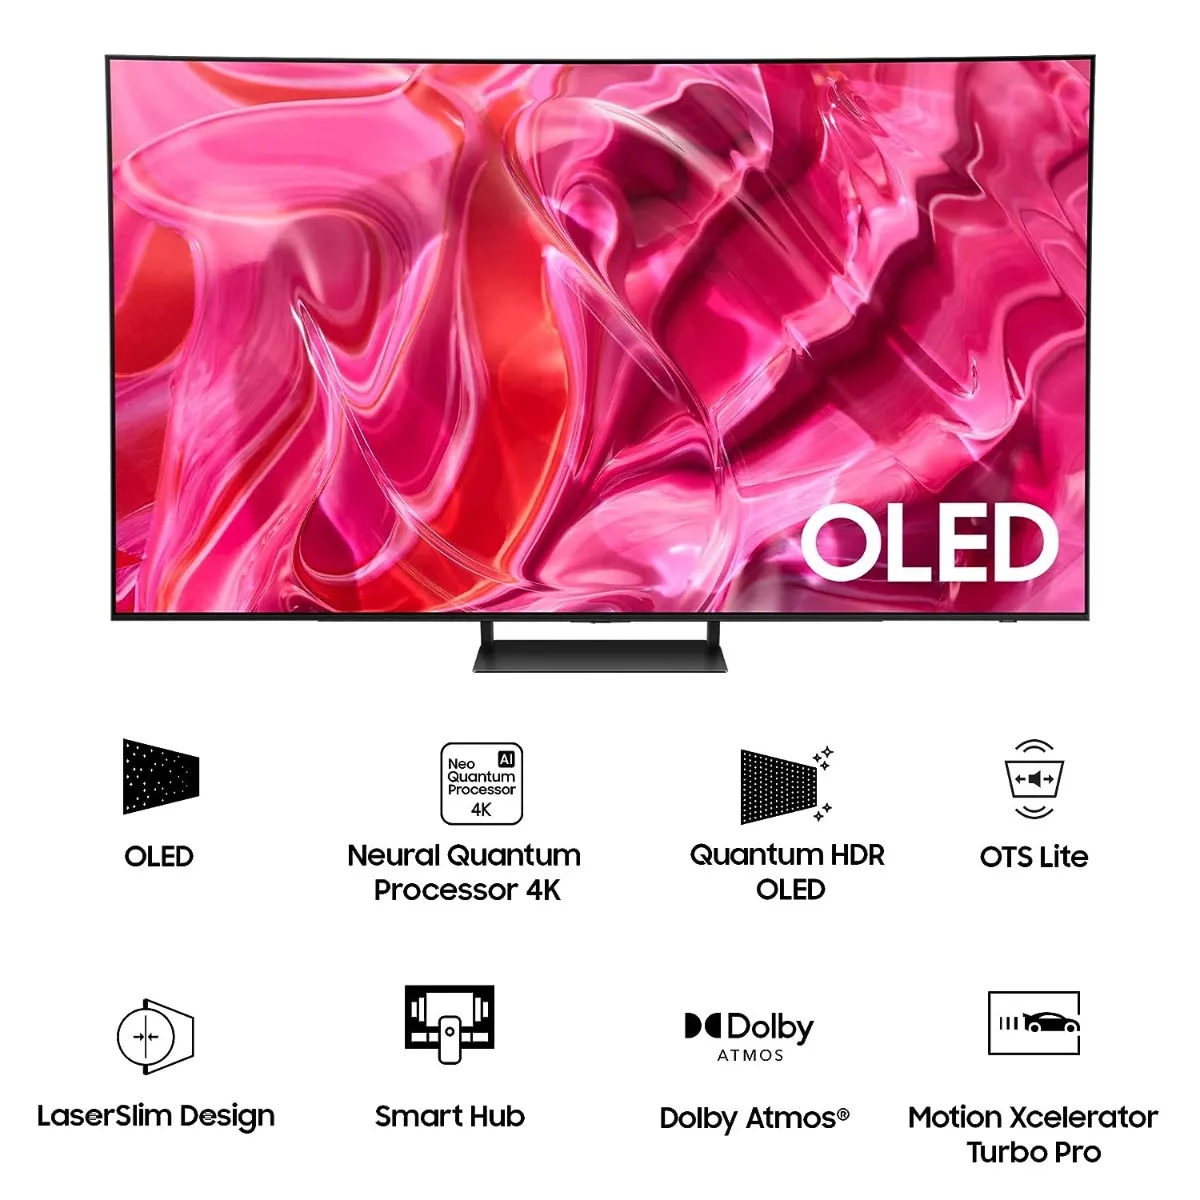 SAMSUNG Neo QLED 138 cm (55 inch) QLED Ultra HD (4K) Smart Tizen TV Online  at best Prices In India